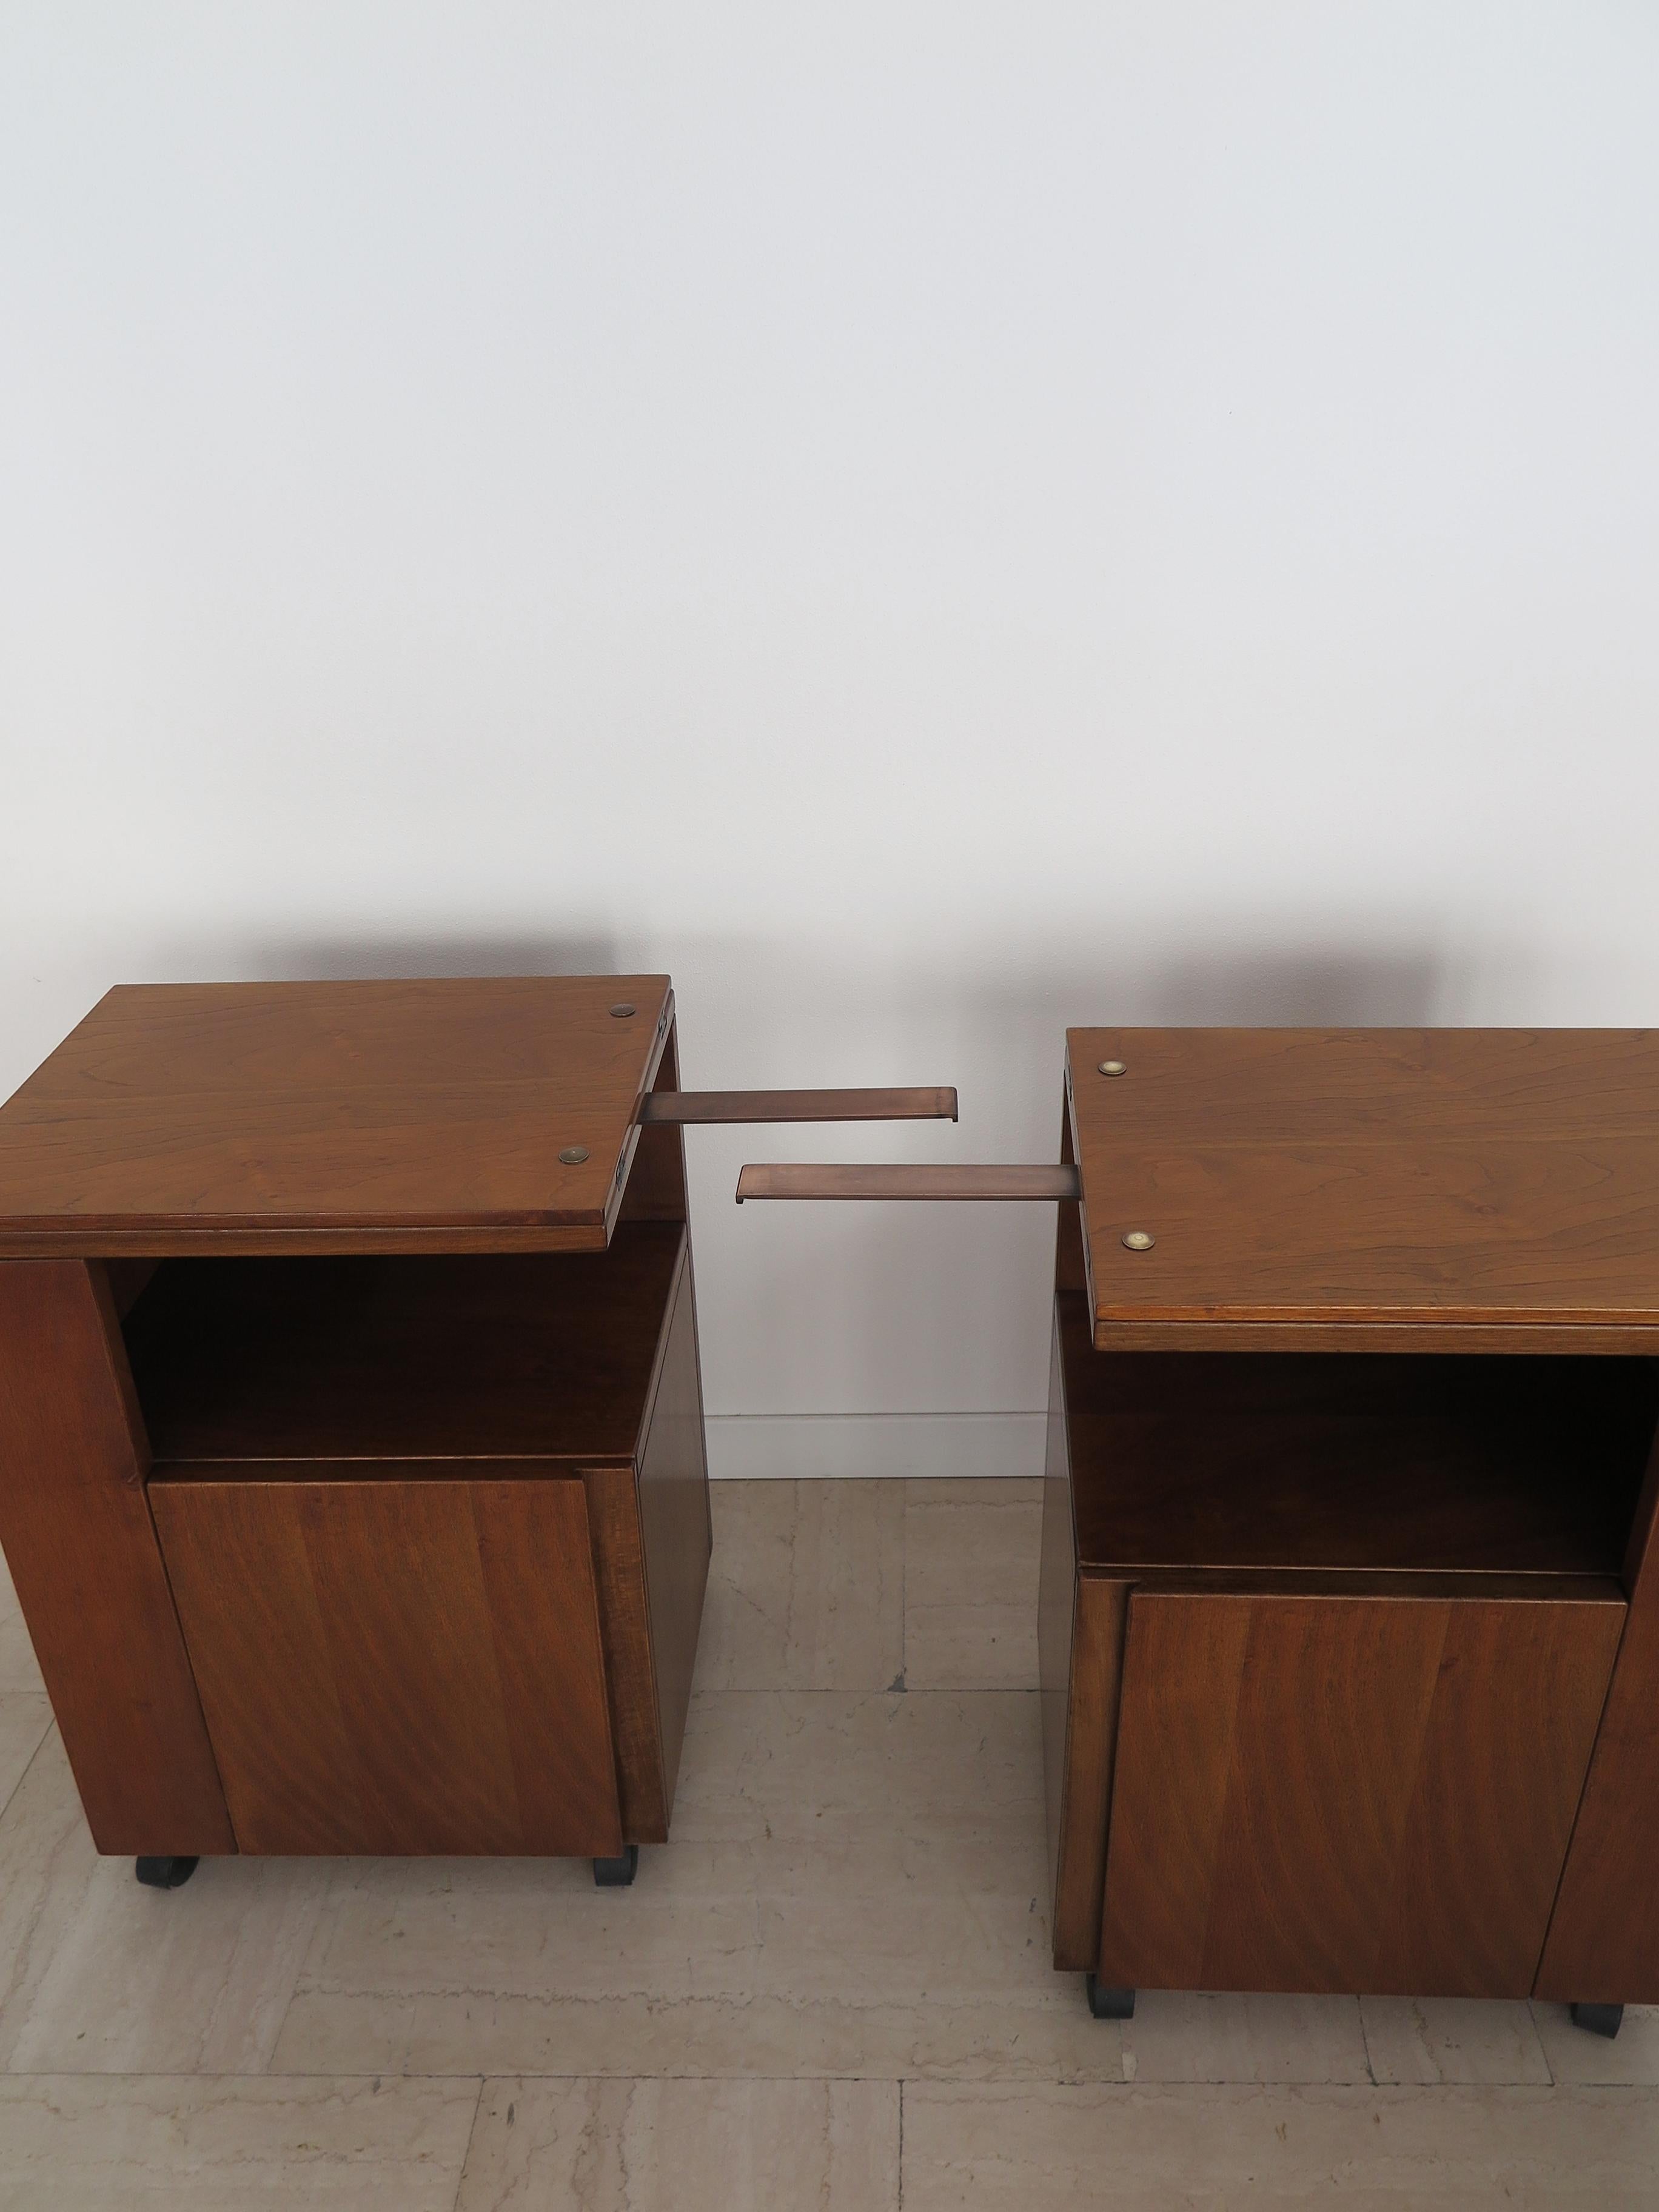 Giovanni Michelucci Poltronova Italian Wood Bedside Tables Nithg Stands 1960s For Sale 2